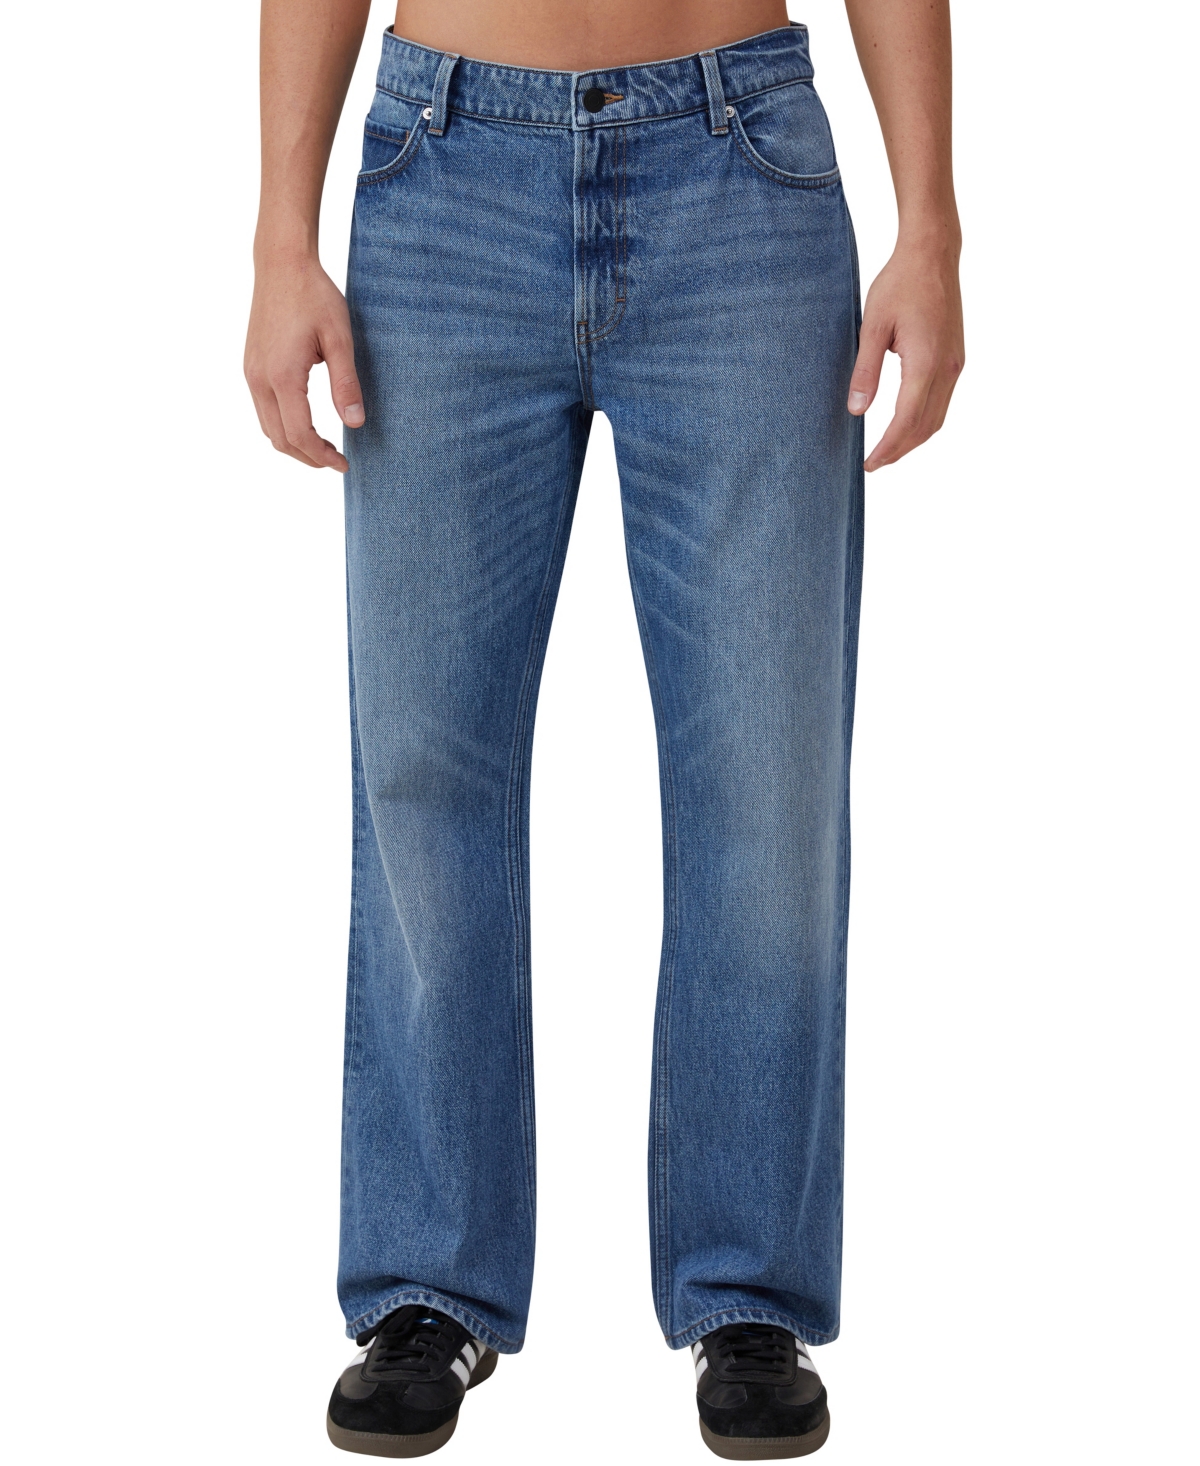 Cotton On Men's Relaxed Boot Cut Jean In Supernova Blue